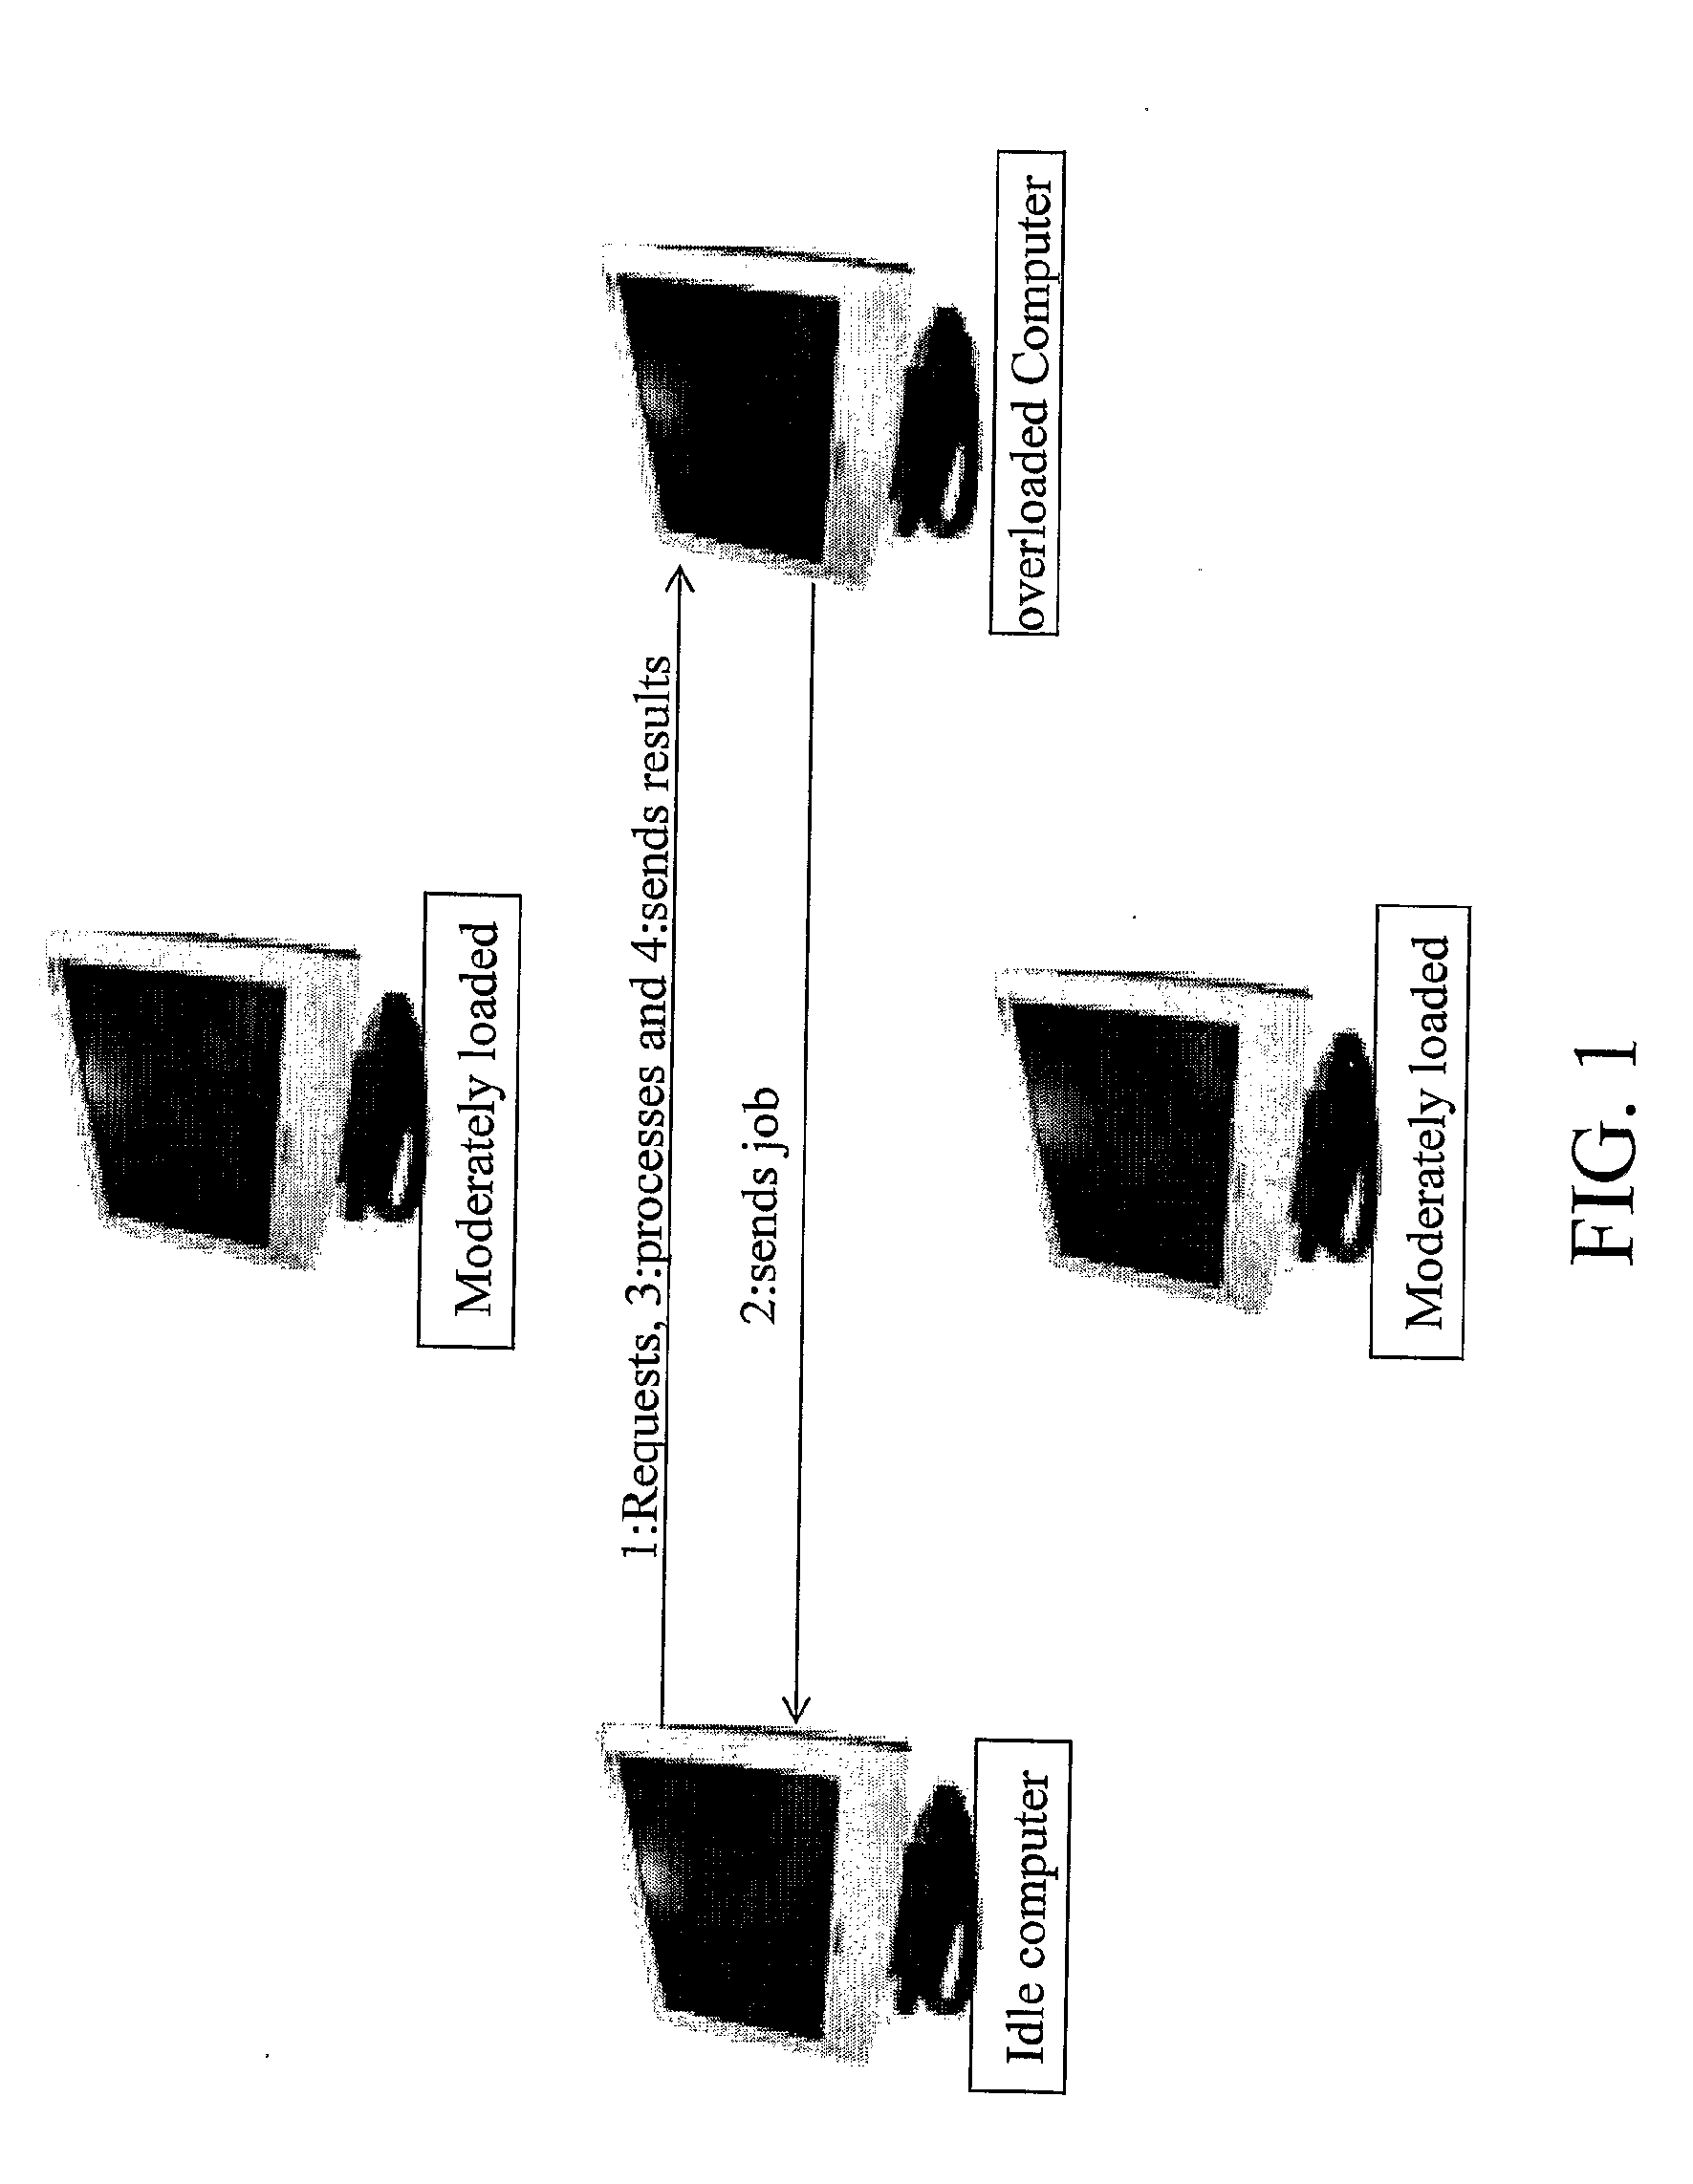 Method and System for Load Balancing in a Distributed Computer System